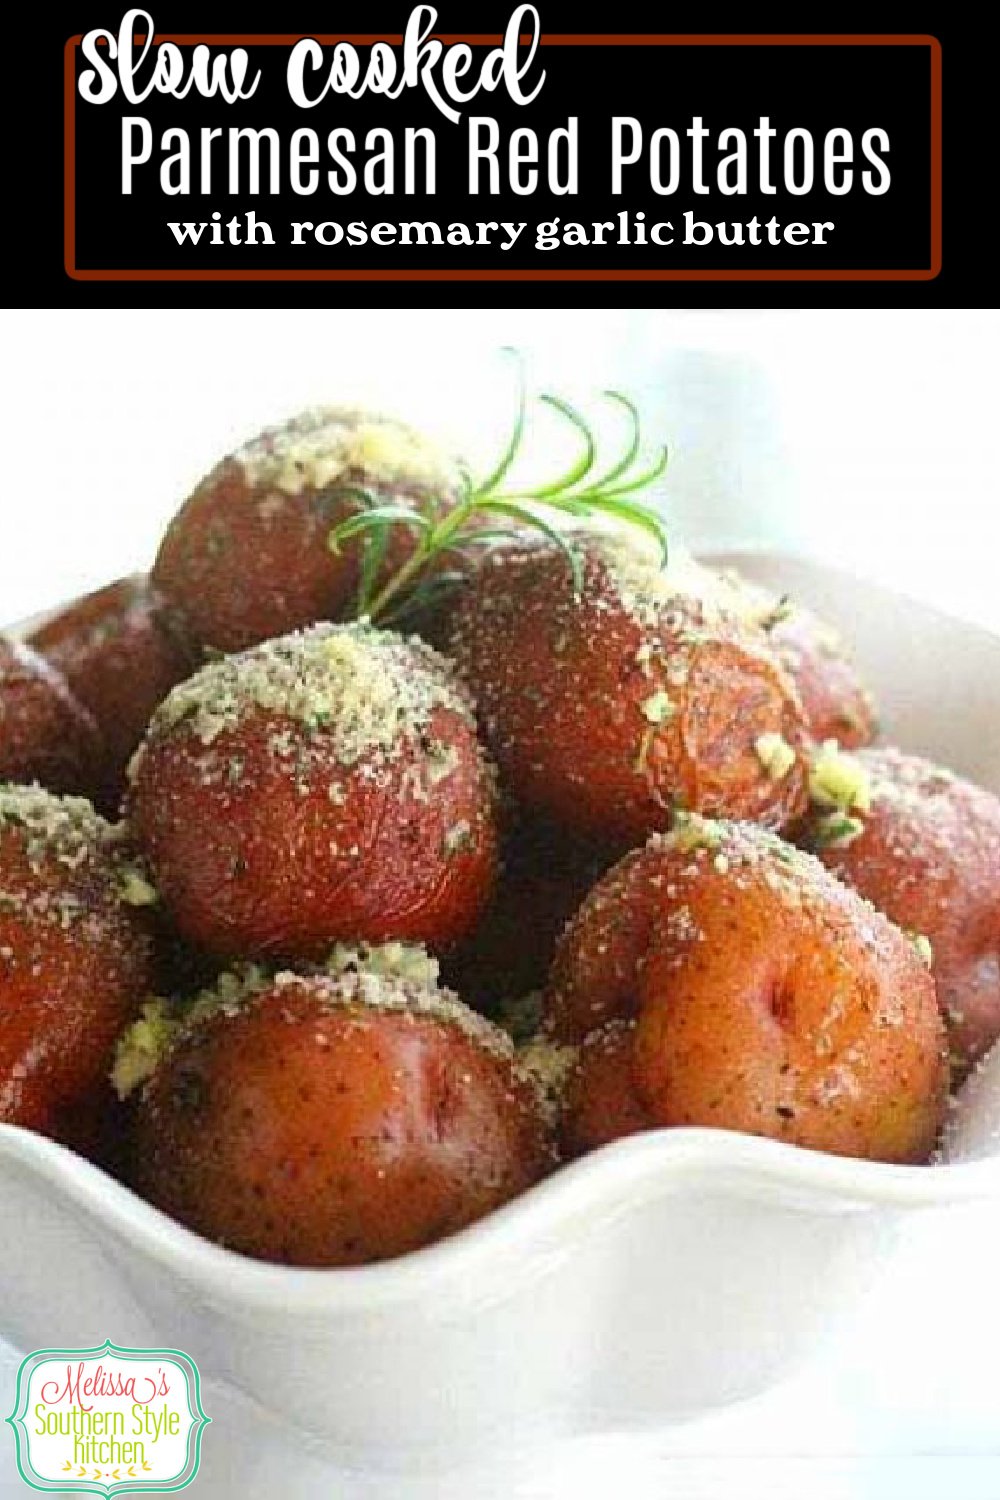 Make these impressive Slow Cooked Parmesan Red Potatoes in a cinch in your slow cooker #slowcookedpotatoes #redpotatoes #easypotatorecipes #redpotatoes #crockpotpotates #rosemarybutter #garlicbutter